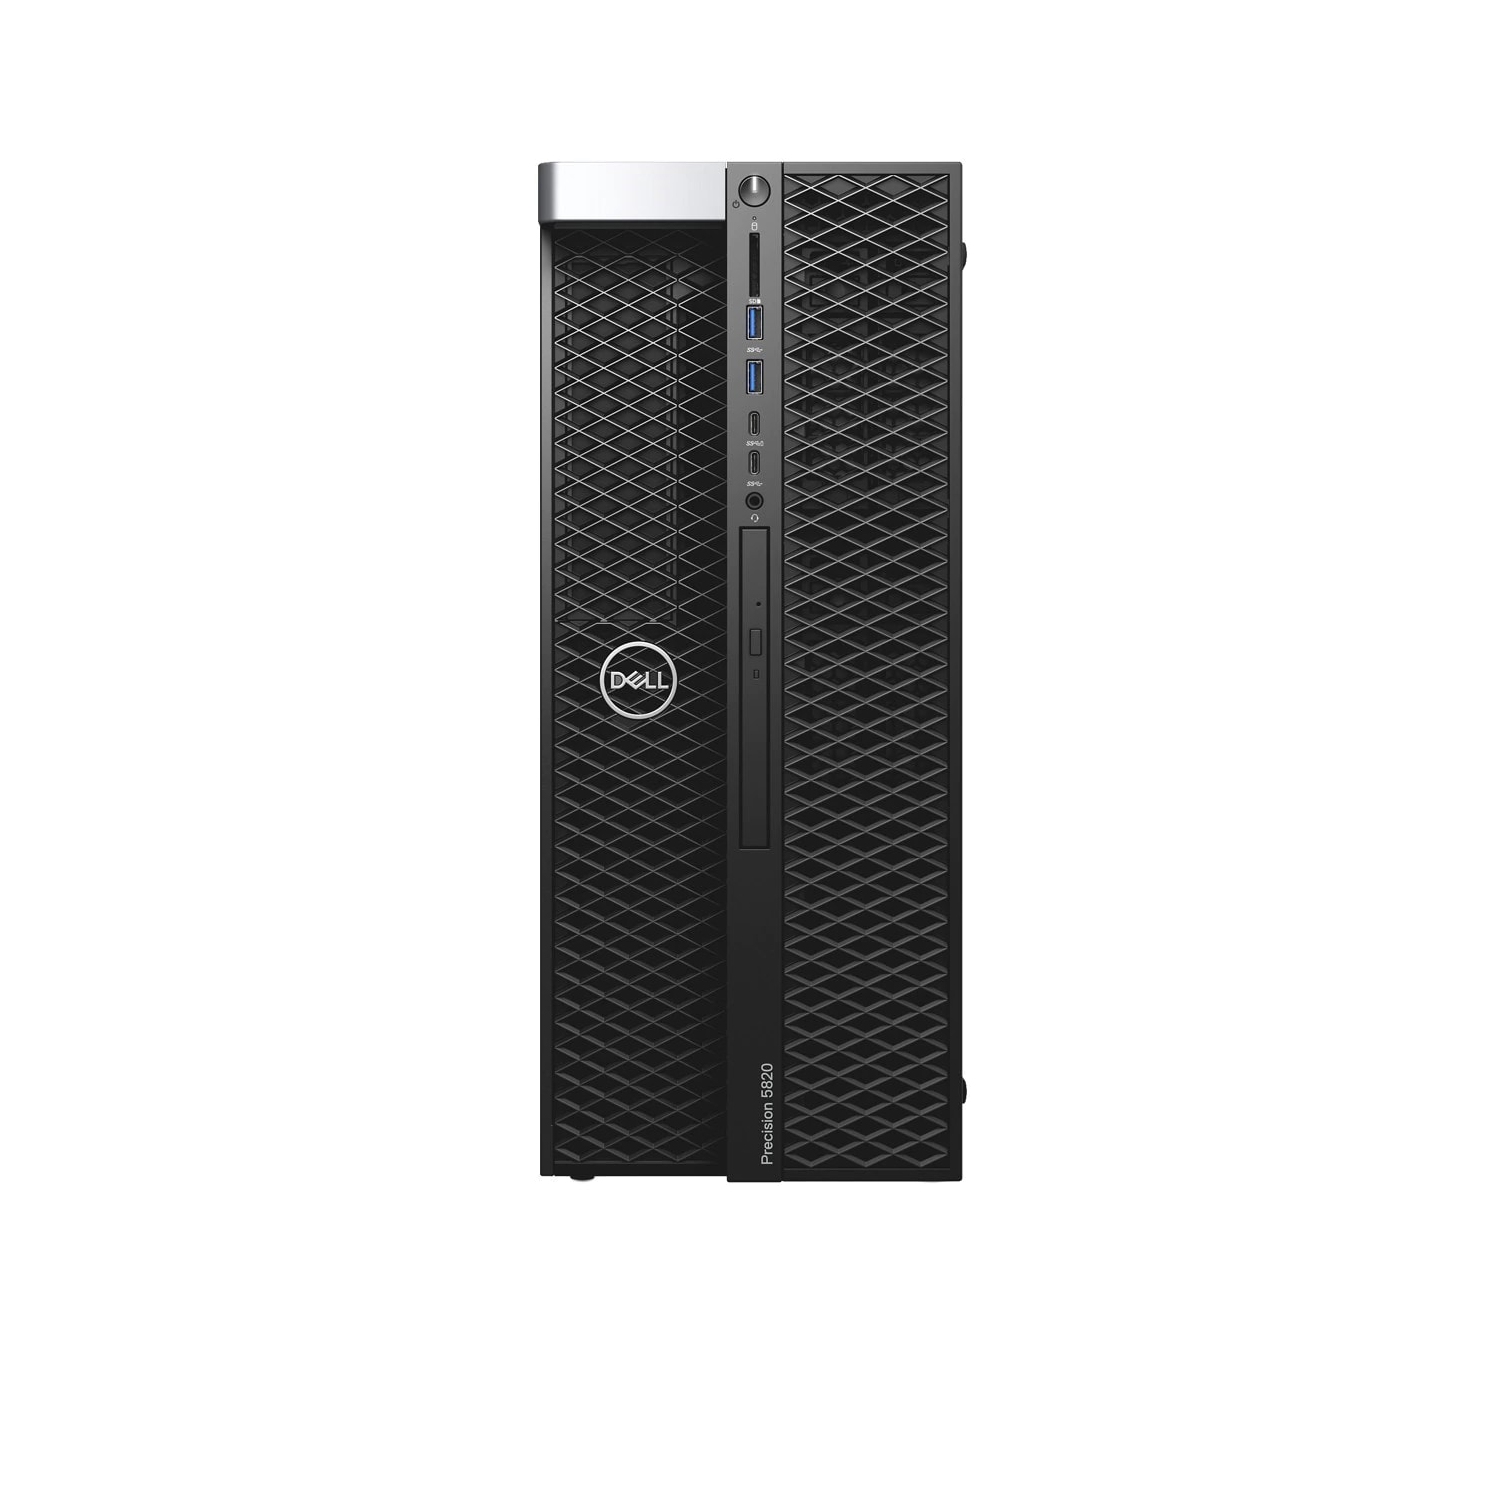 Refurbished (Excellent) - Dell Precision T5820 Workstation Desktop (2018), Core Xeon W, 2TB HDD + 512GB SSD, 32GB RAM, RTX 4000, 8 Cores @ 4.5 GHz Certified Refurbished